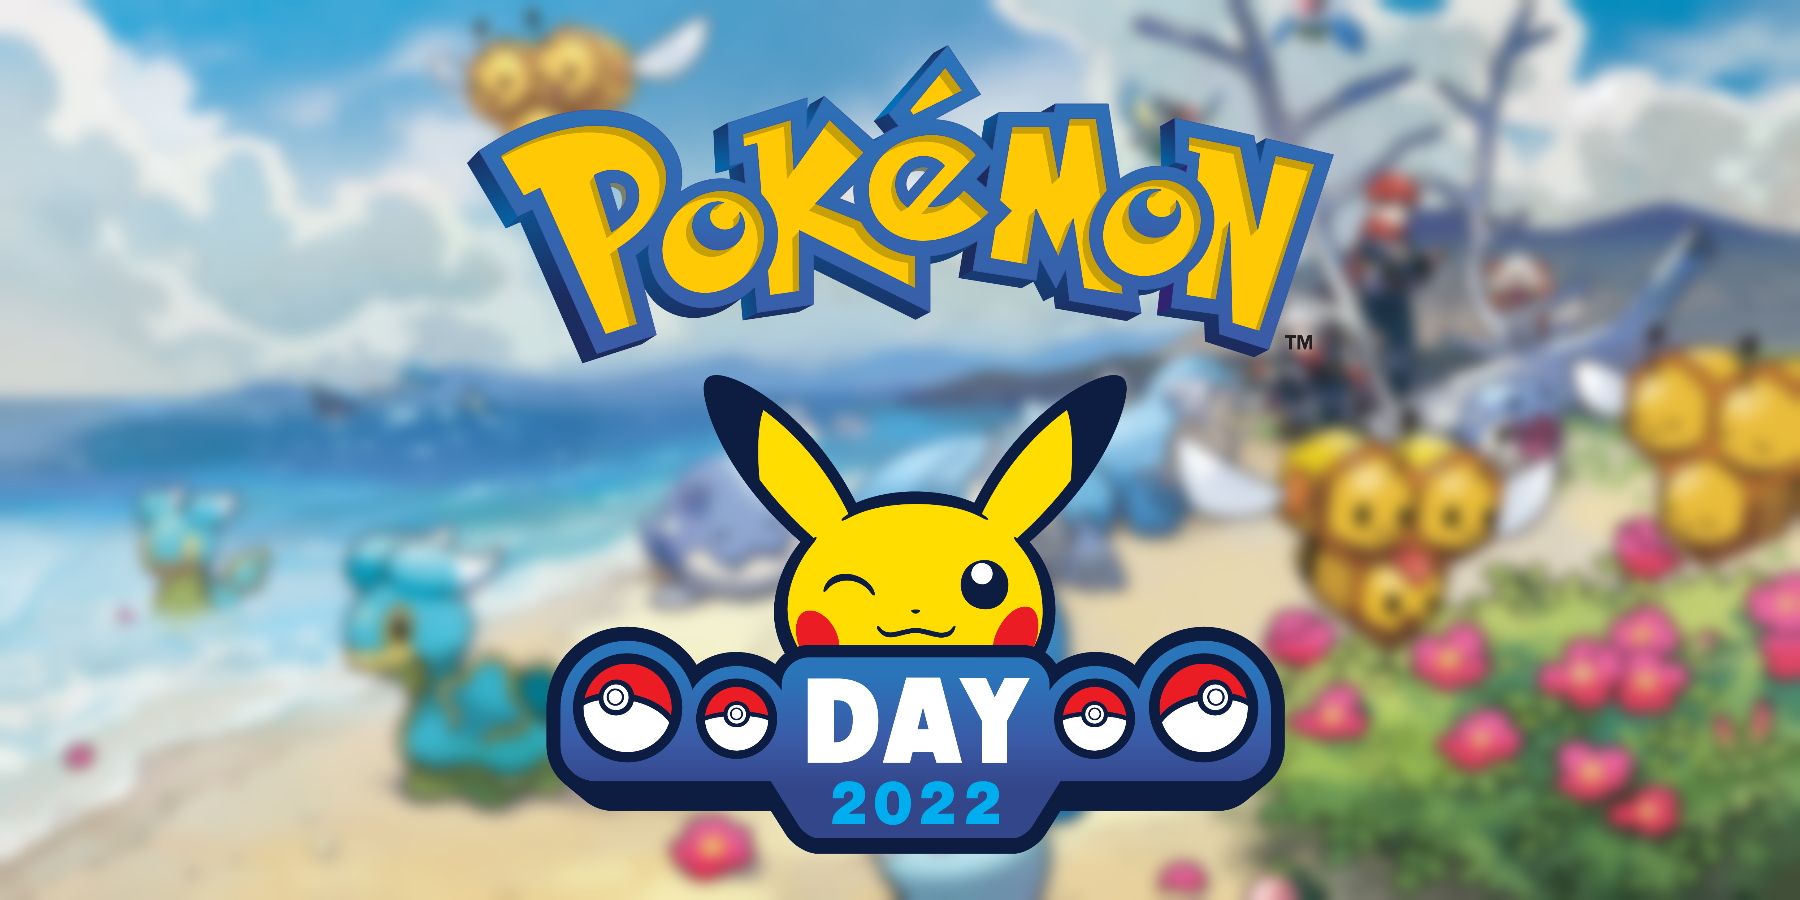 National Pokemon Day (February 27th, 2022) The Real Content